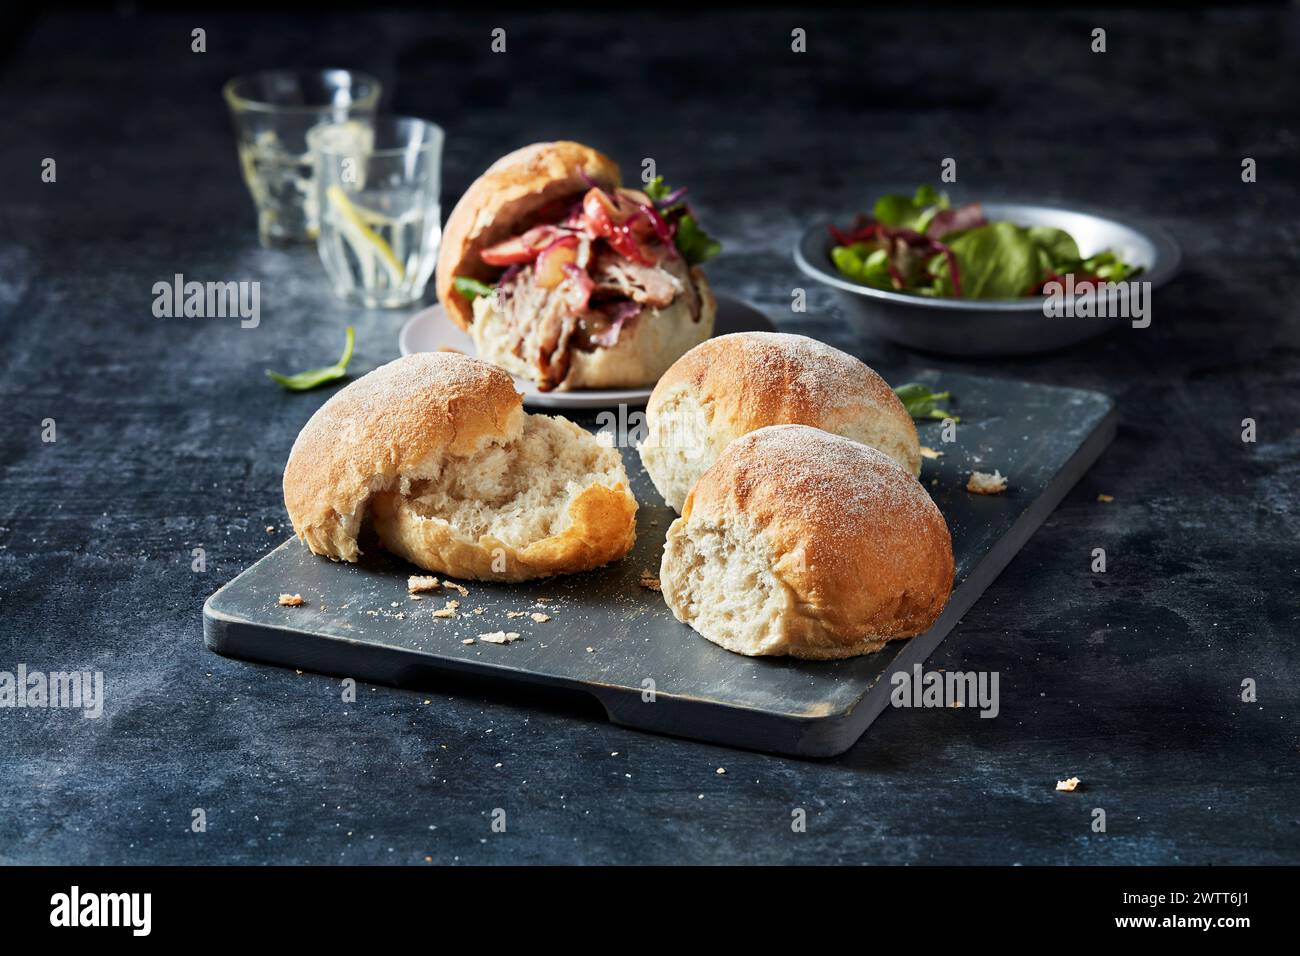 Gourmet pulled pork sandwiches on a rustic slate board with a side salad and a refreshing drink in the background. Stock Photo